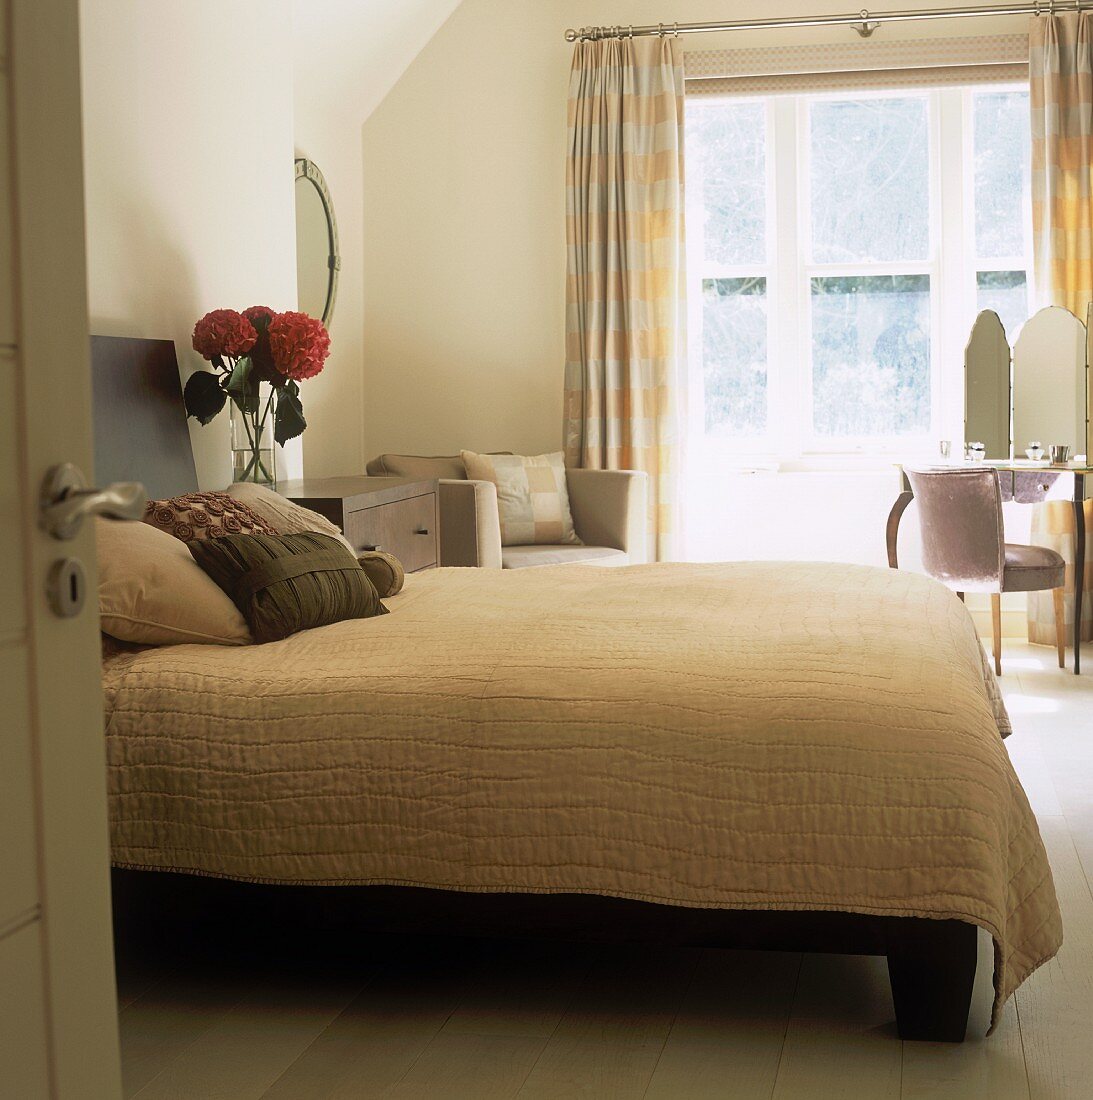 A view through an open door onto a double bed with a white quilt and a dressing table in the corner